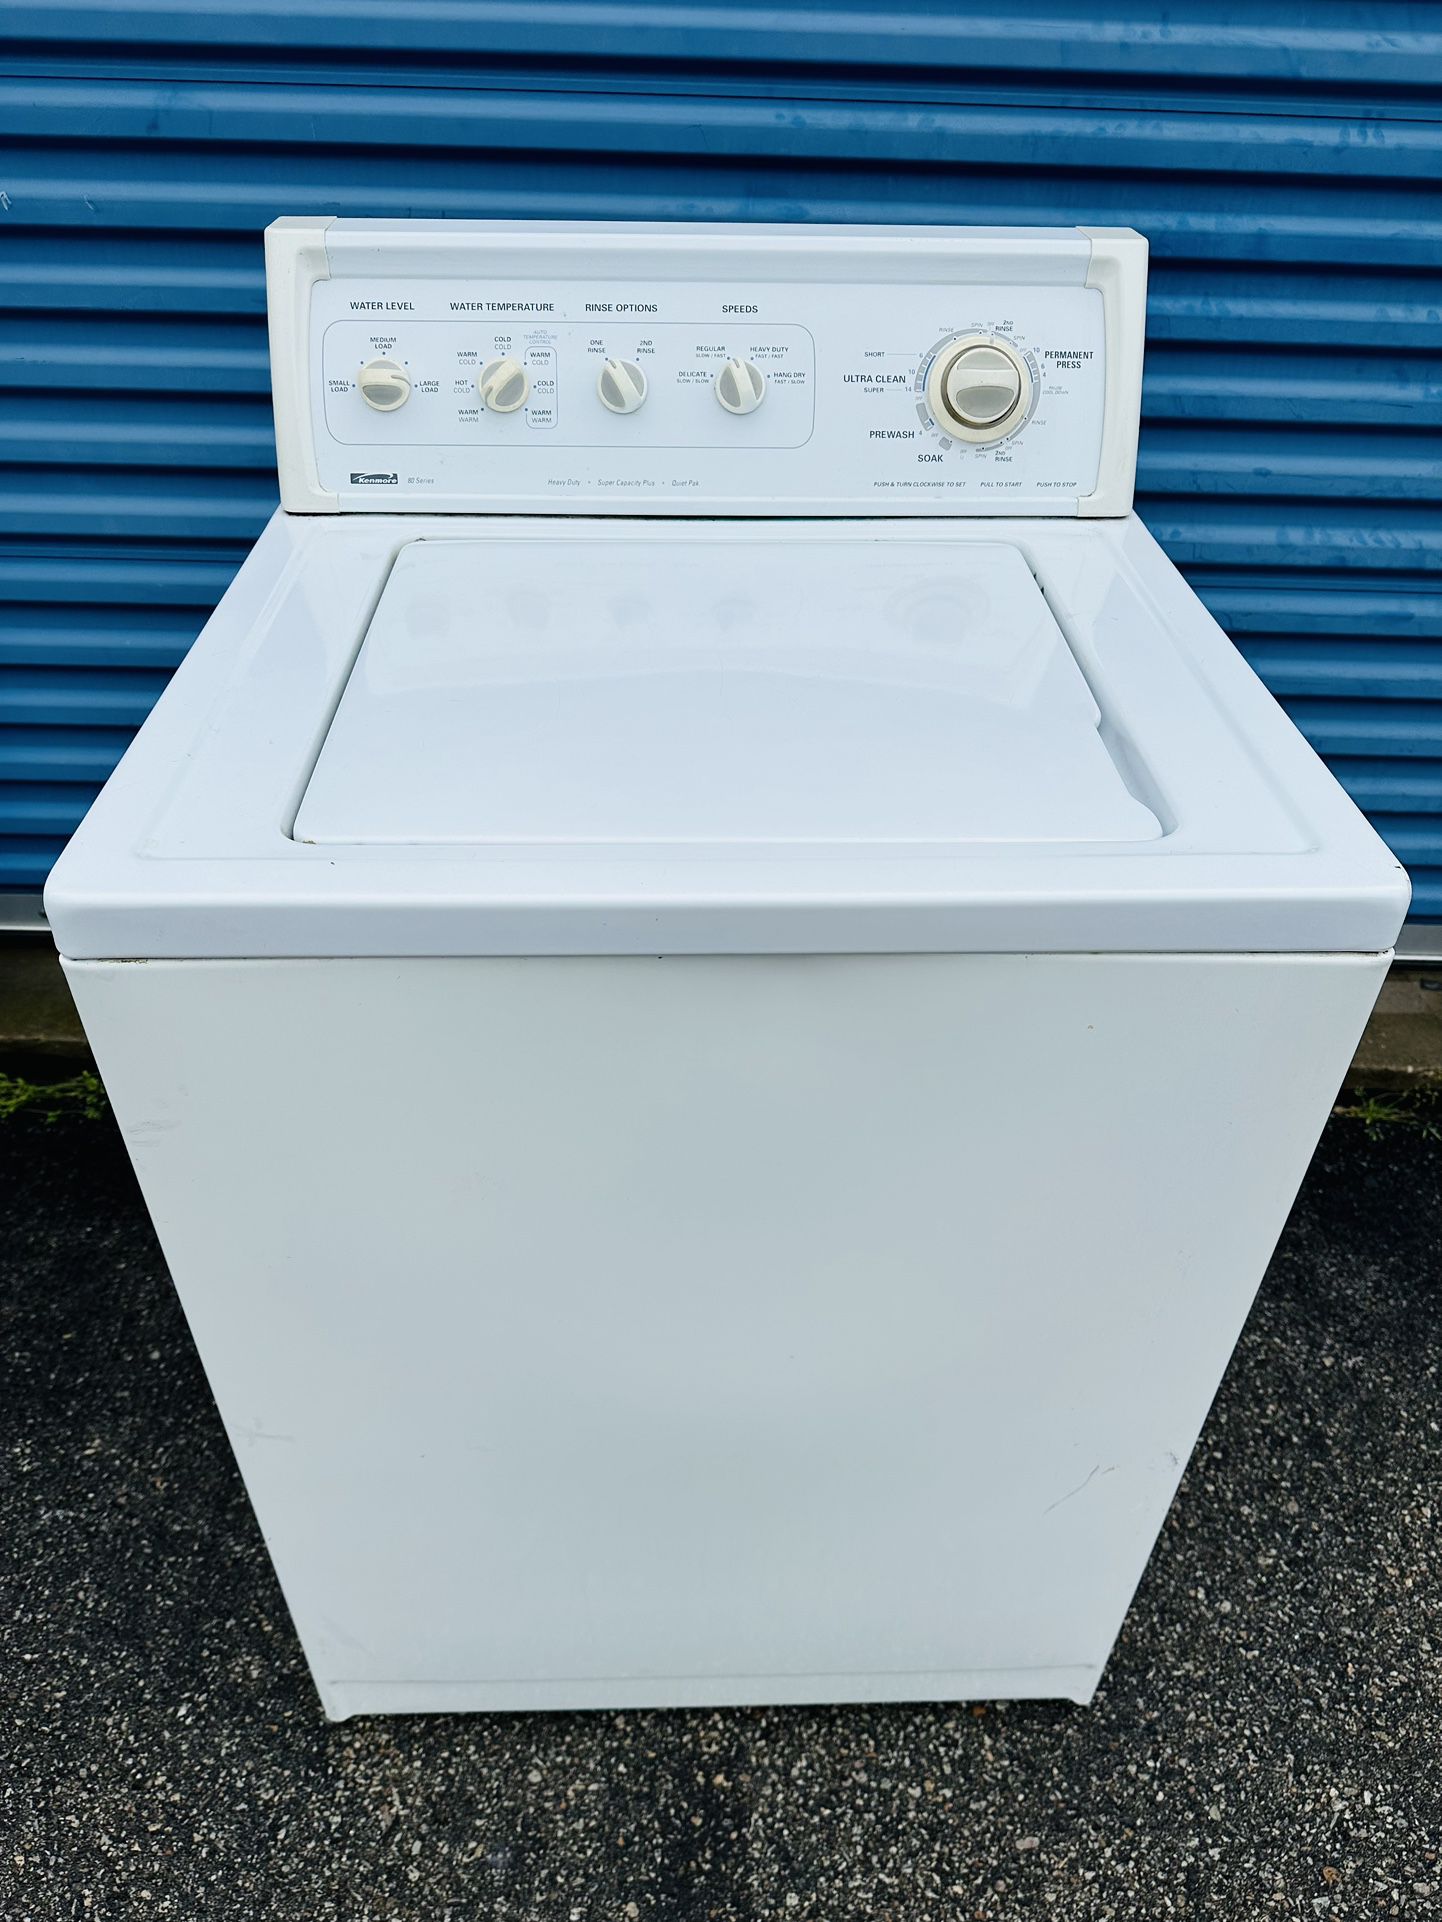 Kenmore Washer - Can Deliver